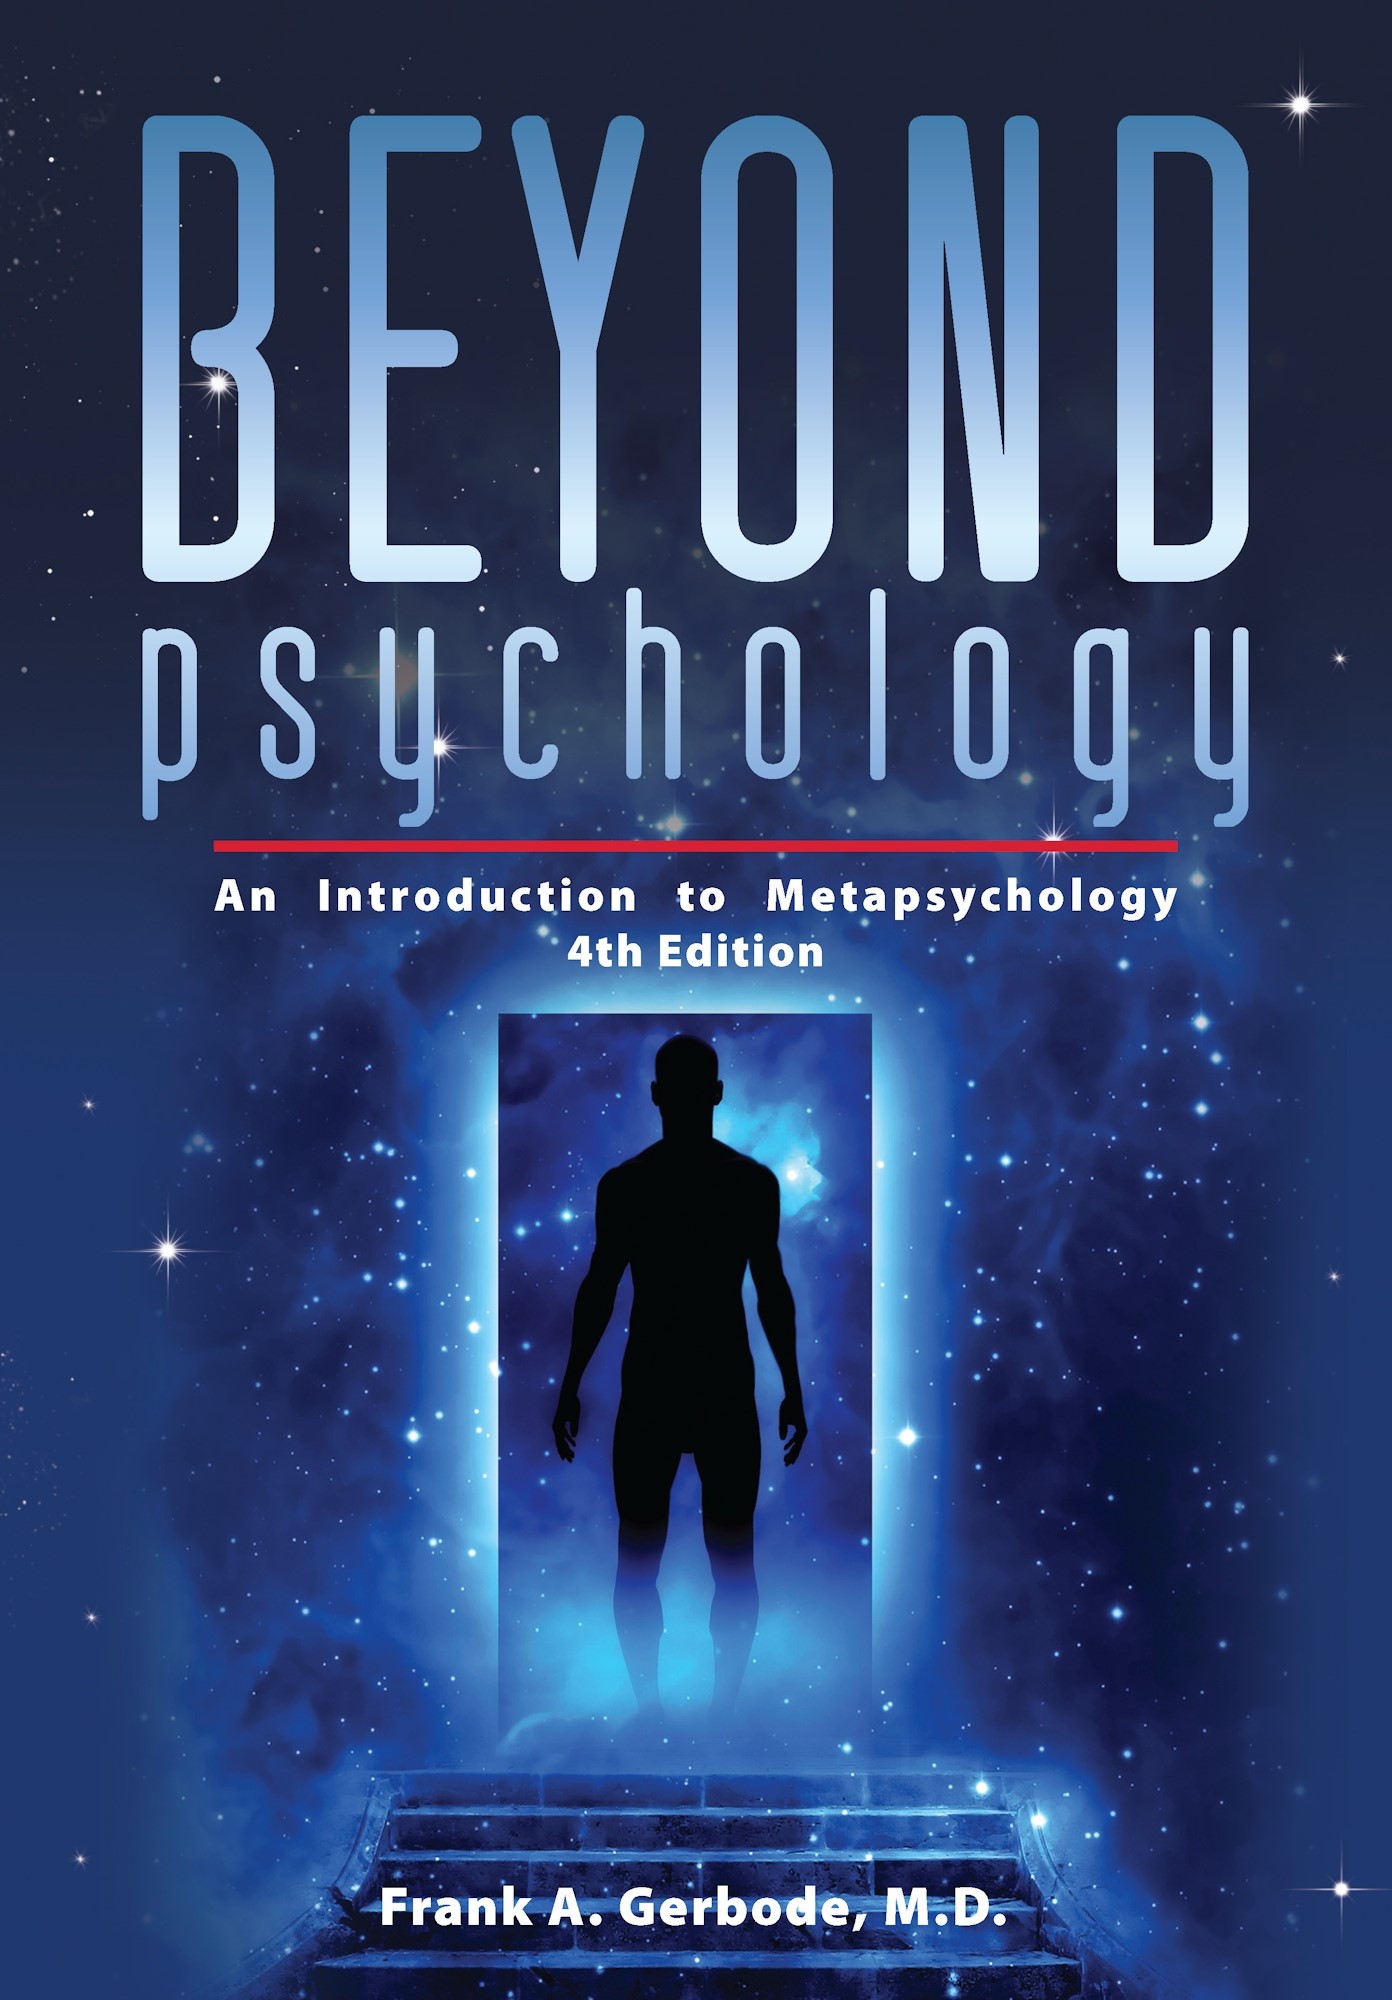 Beyond Psychology: An Introduction to Metapsychology - 4th Ed, Autor: Frank A. Gerbode, M.D